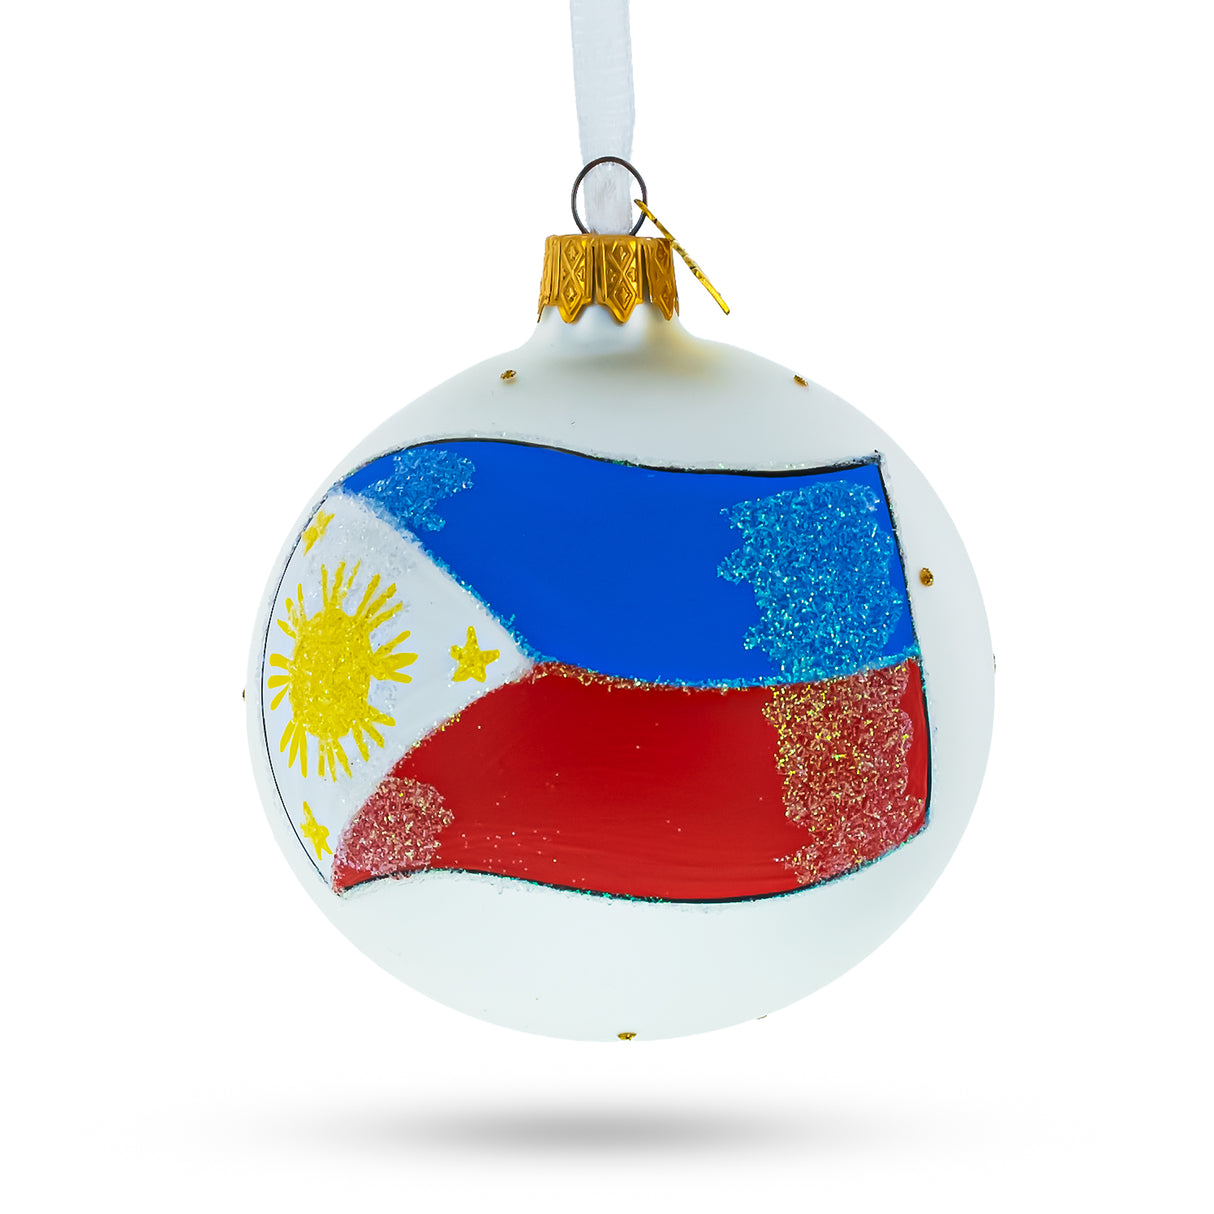 Philippines' Sun & Stars: Flag Design Blown Glass Ball Christmas Ornament 3.25 Inches in White color, Round shape